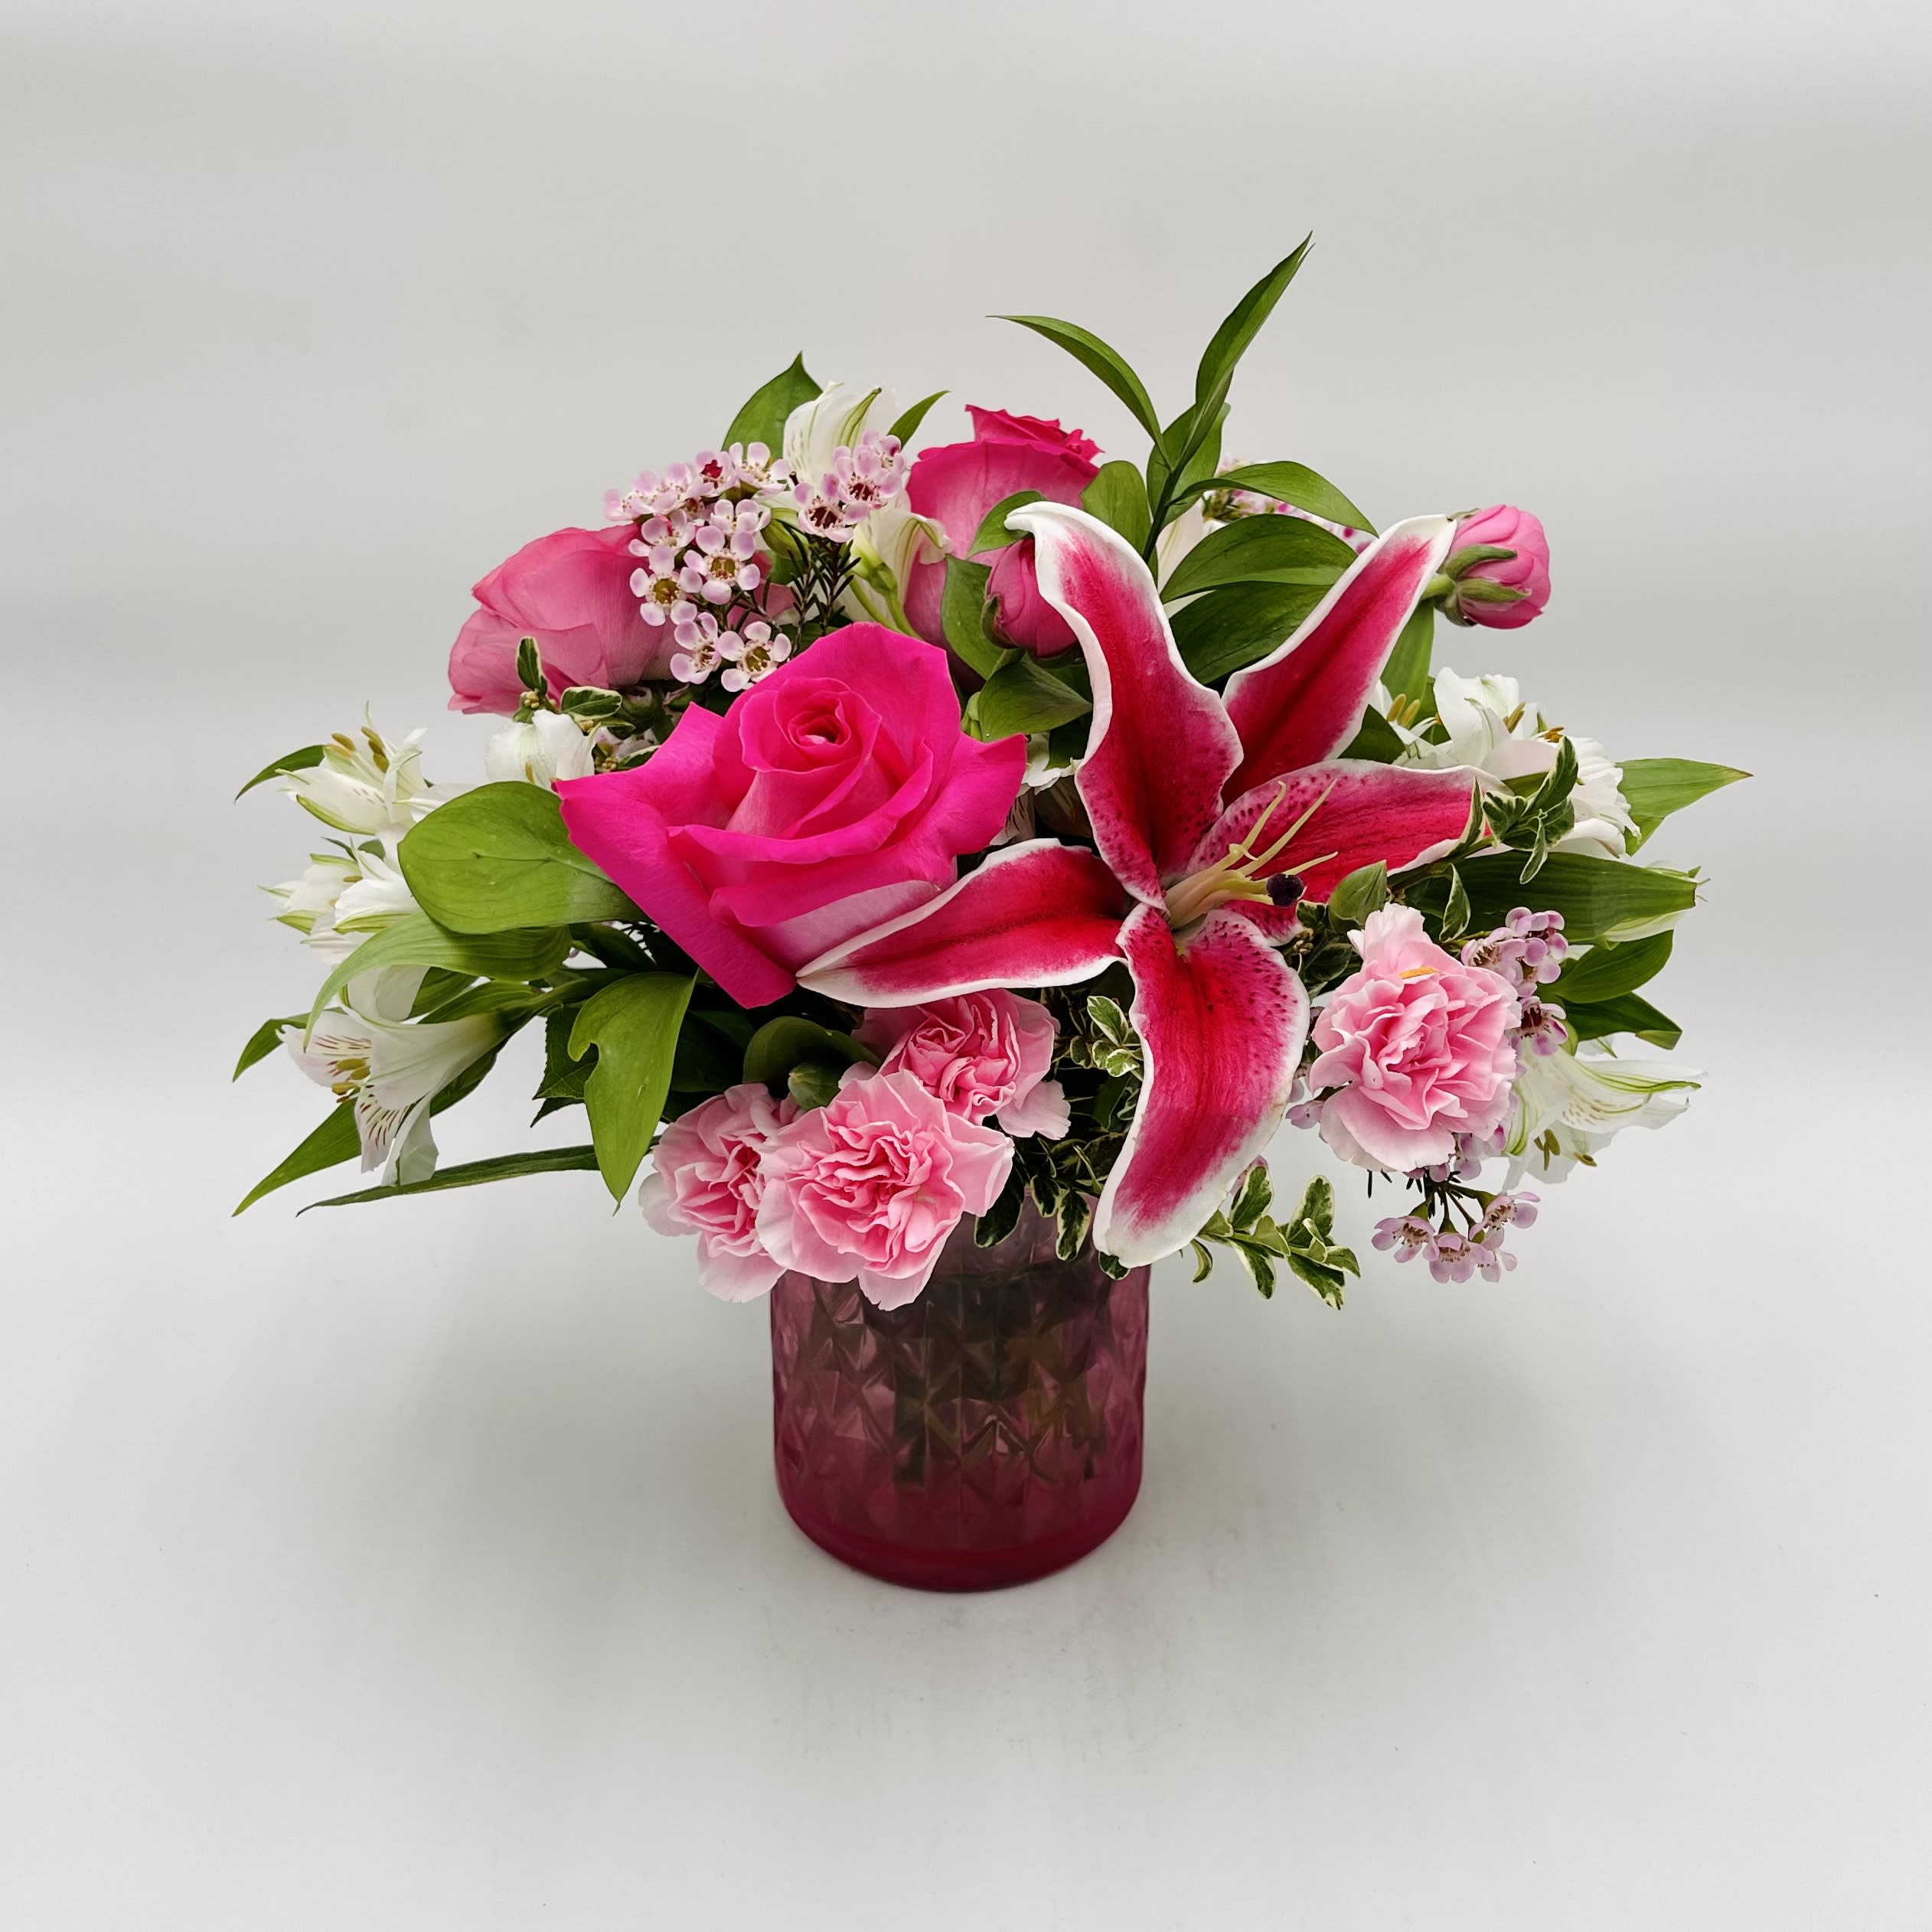 Pink Diamond Mother’s Day Bouquet - A beautiful arrangement of pink blooms in a diamond cut glass vase. Perfect for Mother’s Day.  Arrangement includes stargazer lilies, pink roses, carnations, waxflowers, and alstromeria, accented with assorted greenery.